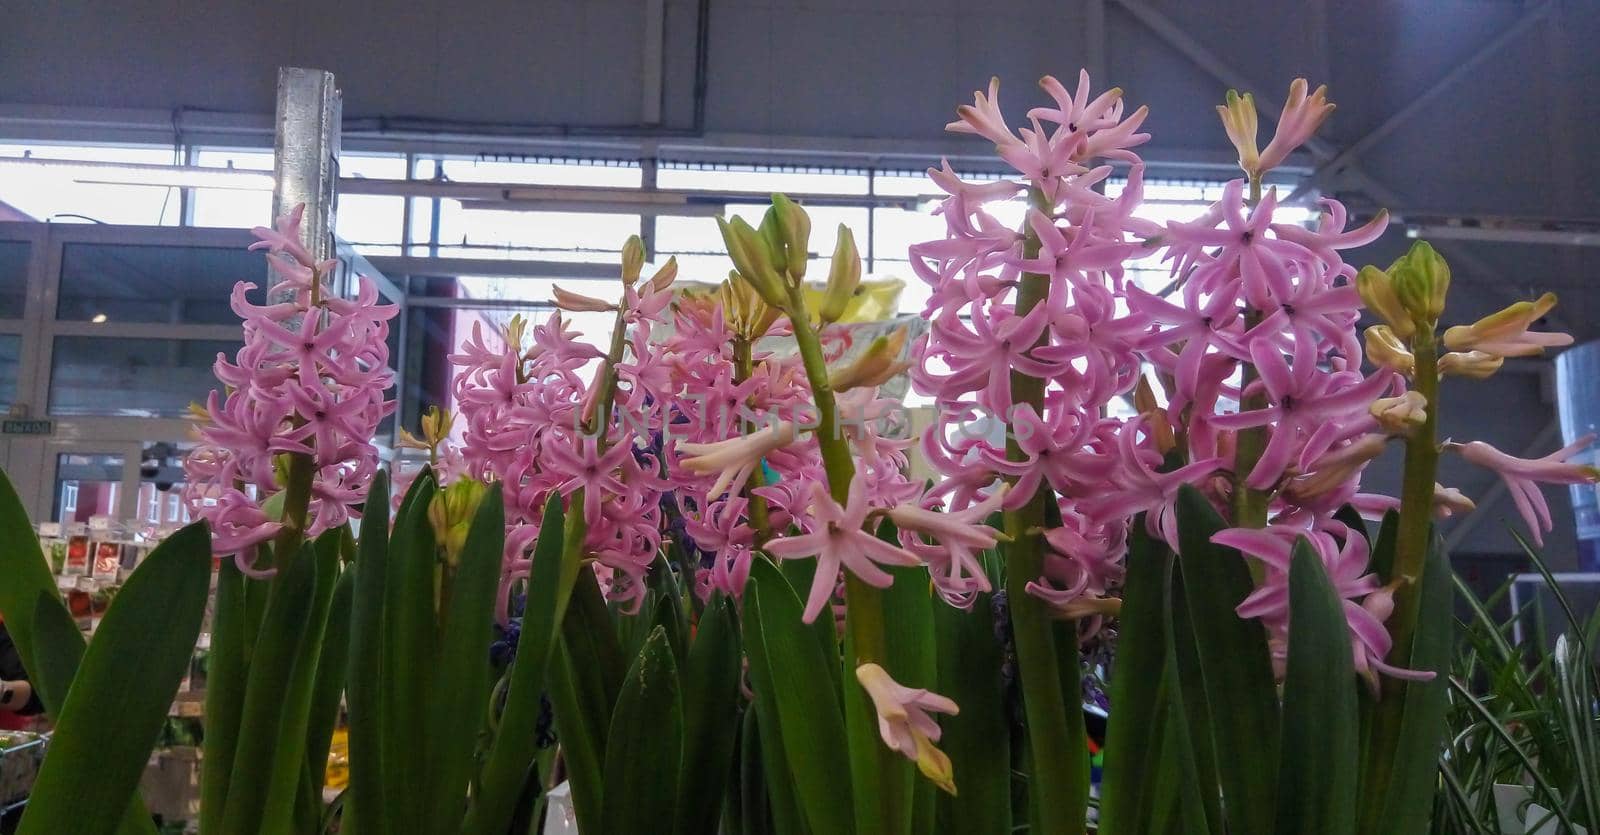 Pink hyacinths on the shelf in the store.The first spring flower by lapushka62